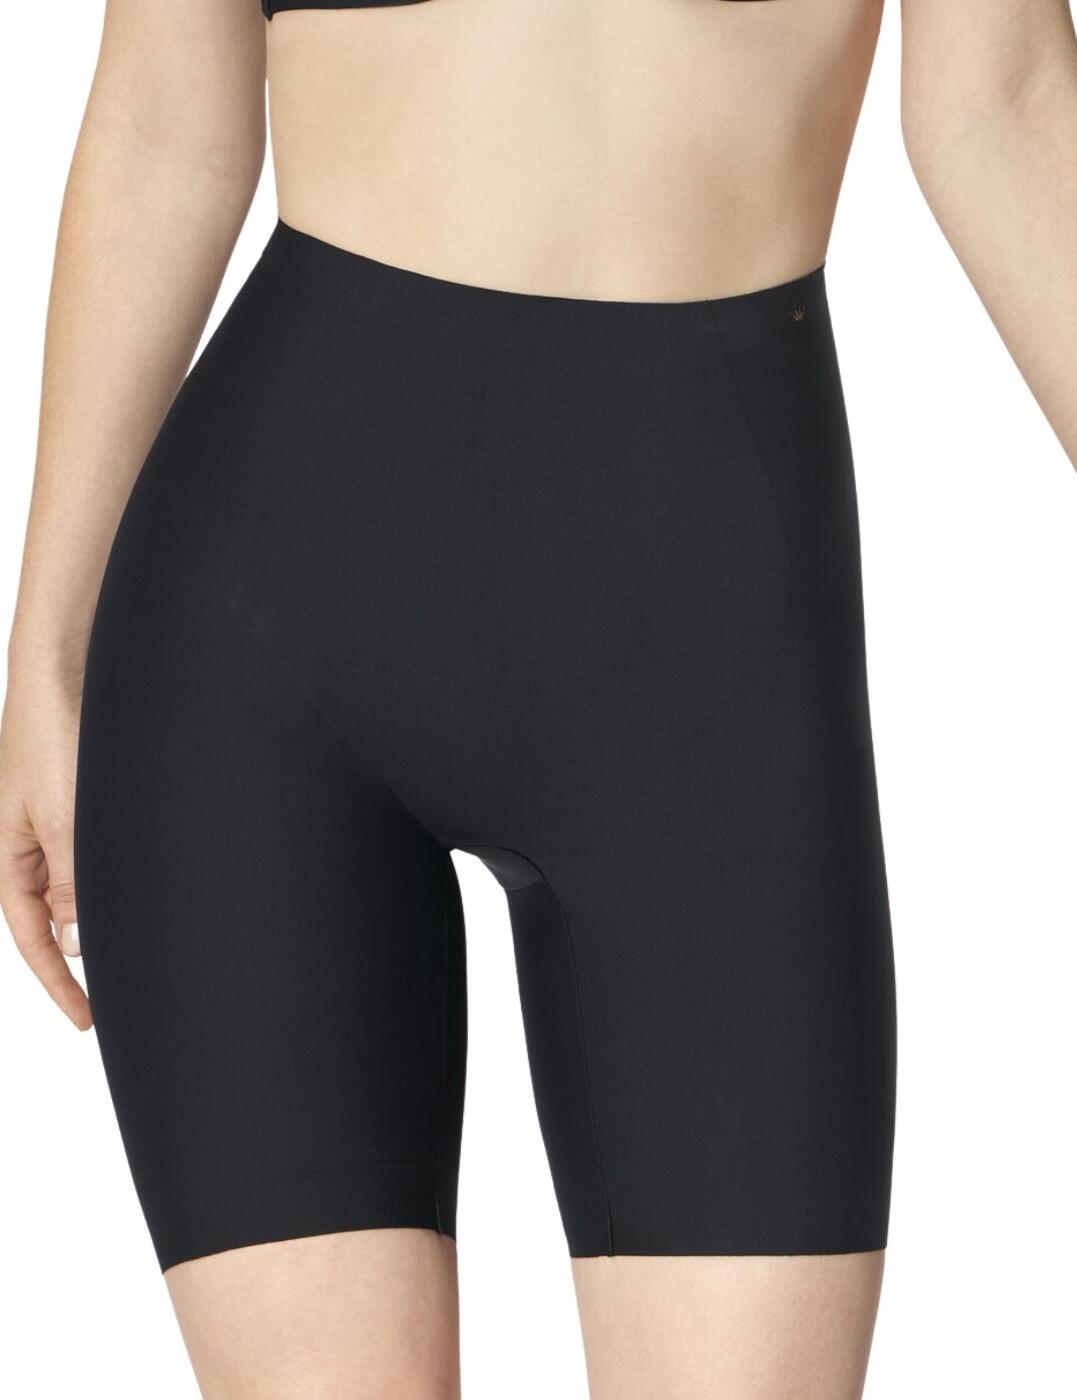 Spanx High-Waisted Mid-Thigh Shaping Tights